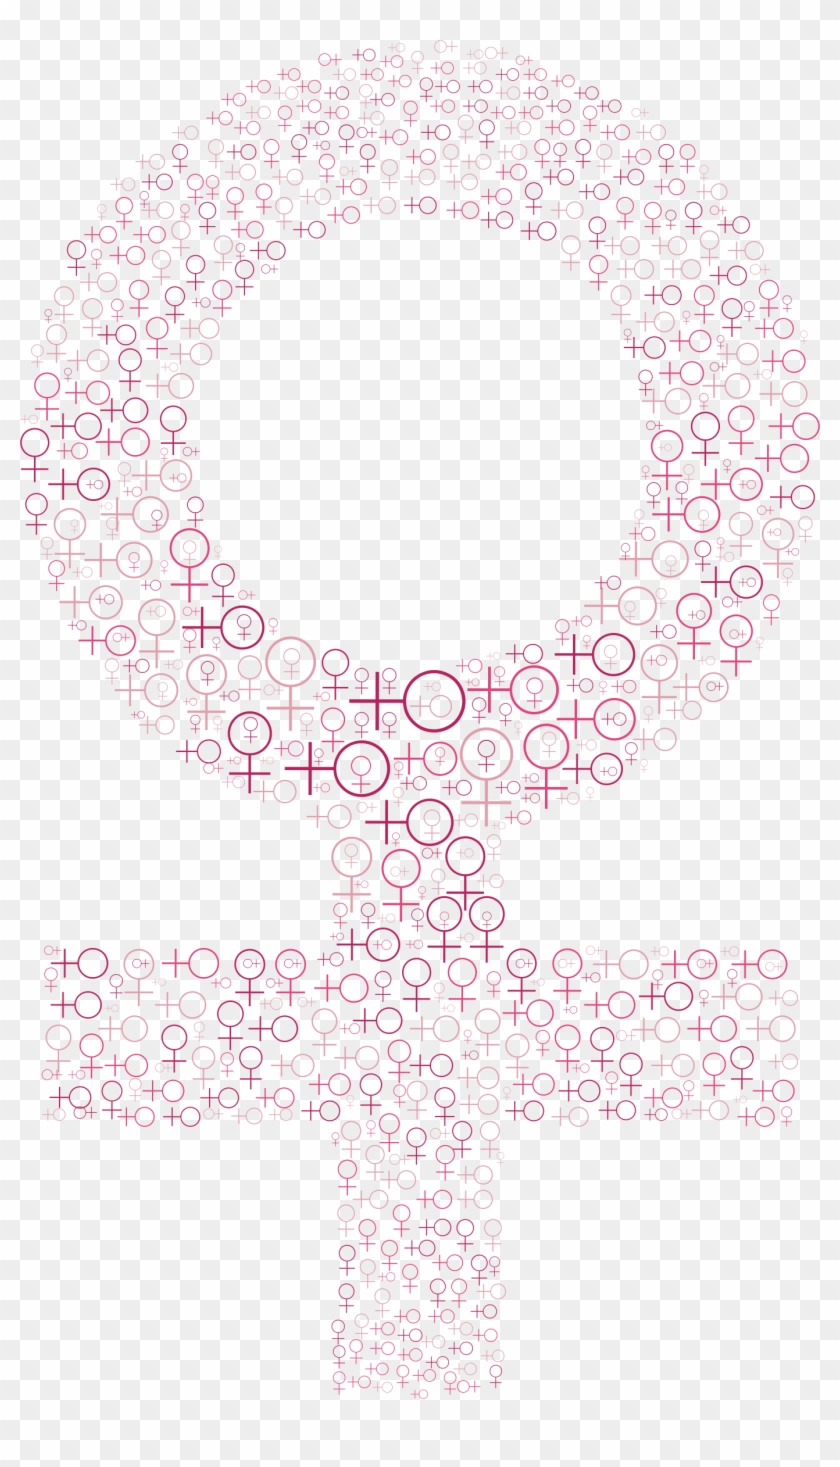 This Free Icons Png Design Of Female Symbol Fractal Clipart #459233